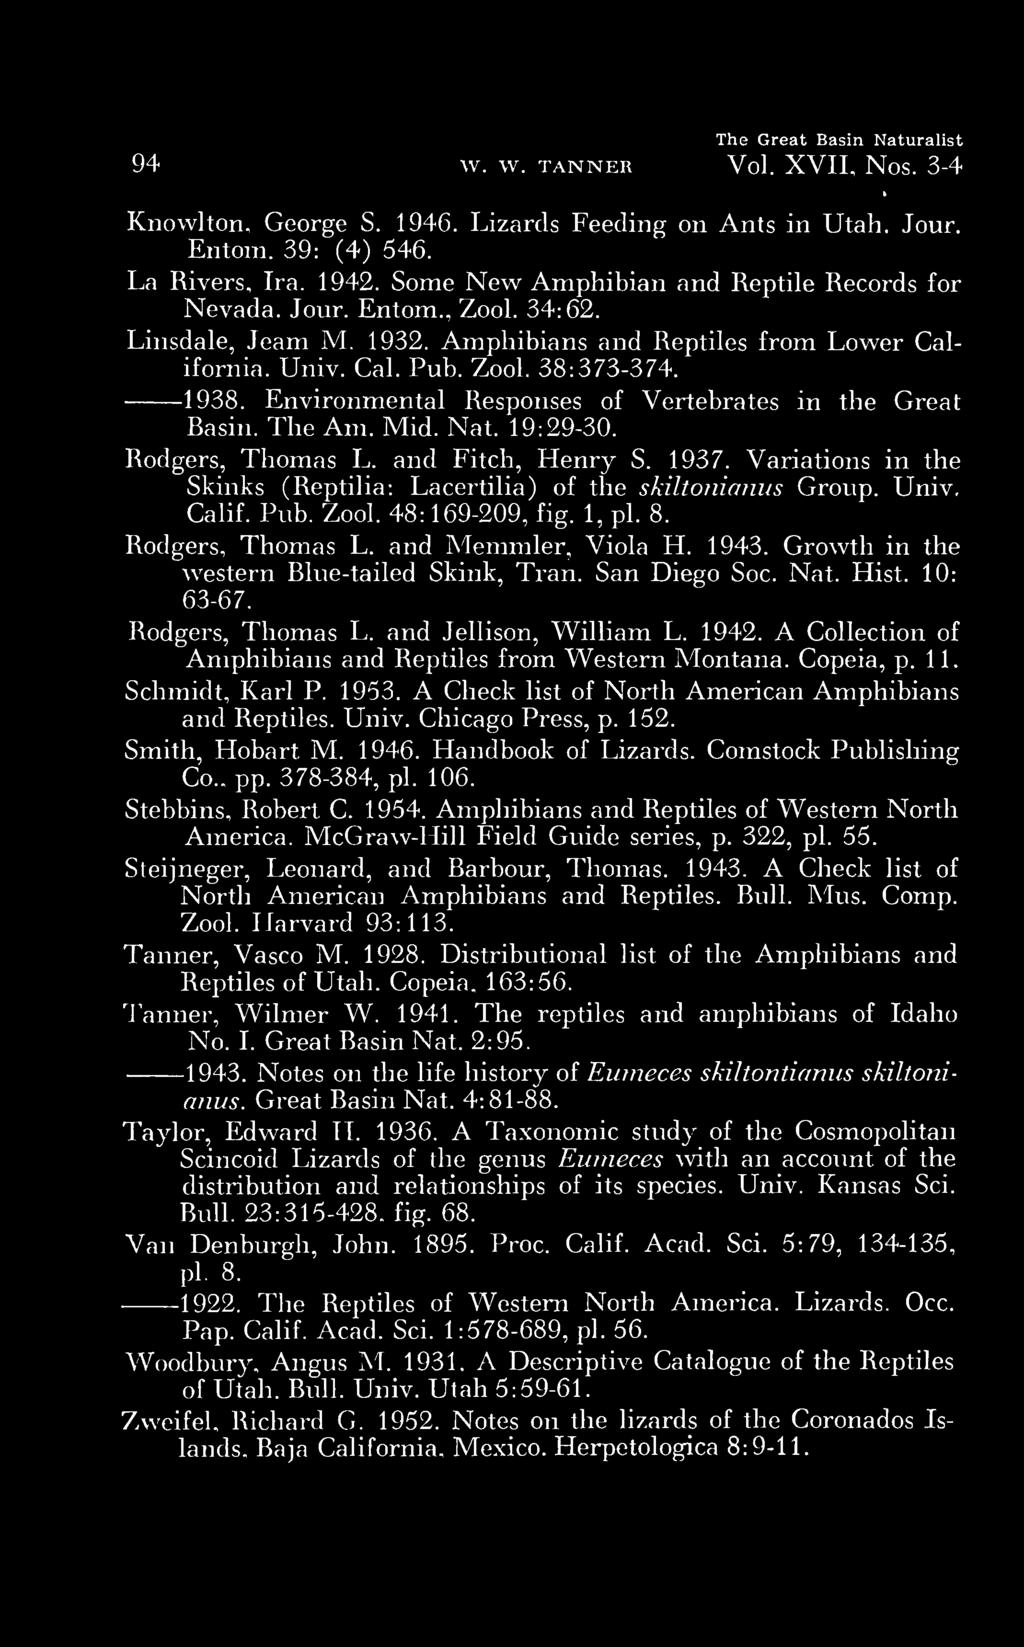 Environmental Responses of Vertebrates in the Great Basin. The Am. Mid. Nat. 19:29-30. Rodgers, Thomas L. and Fitch, Henry S. 1937.